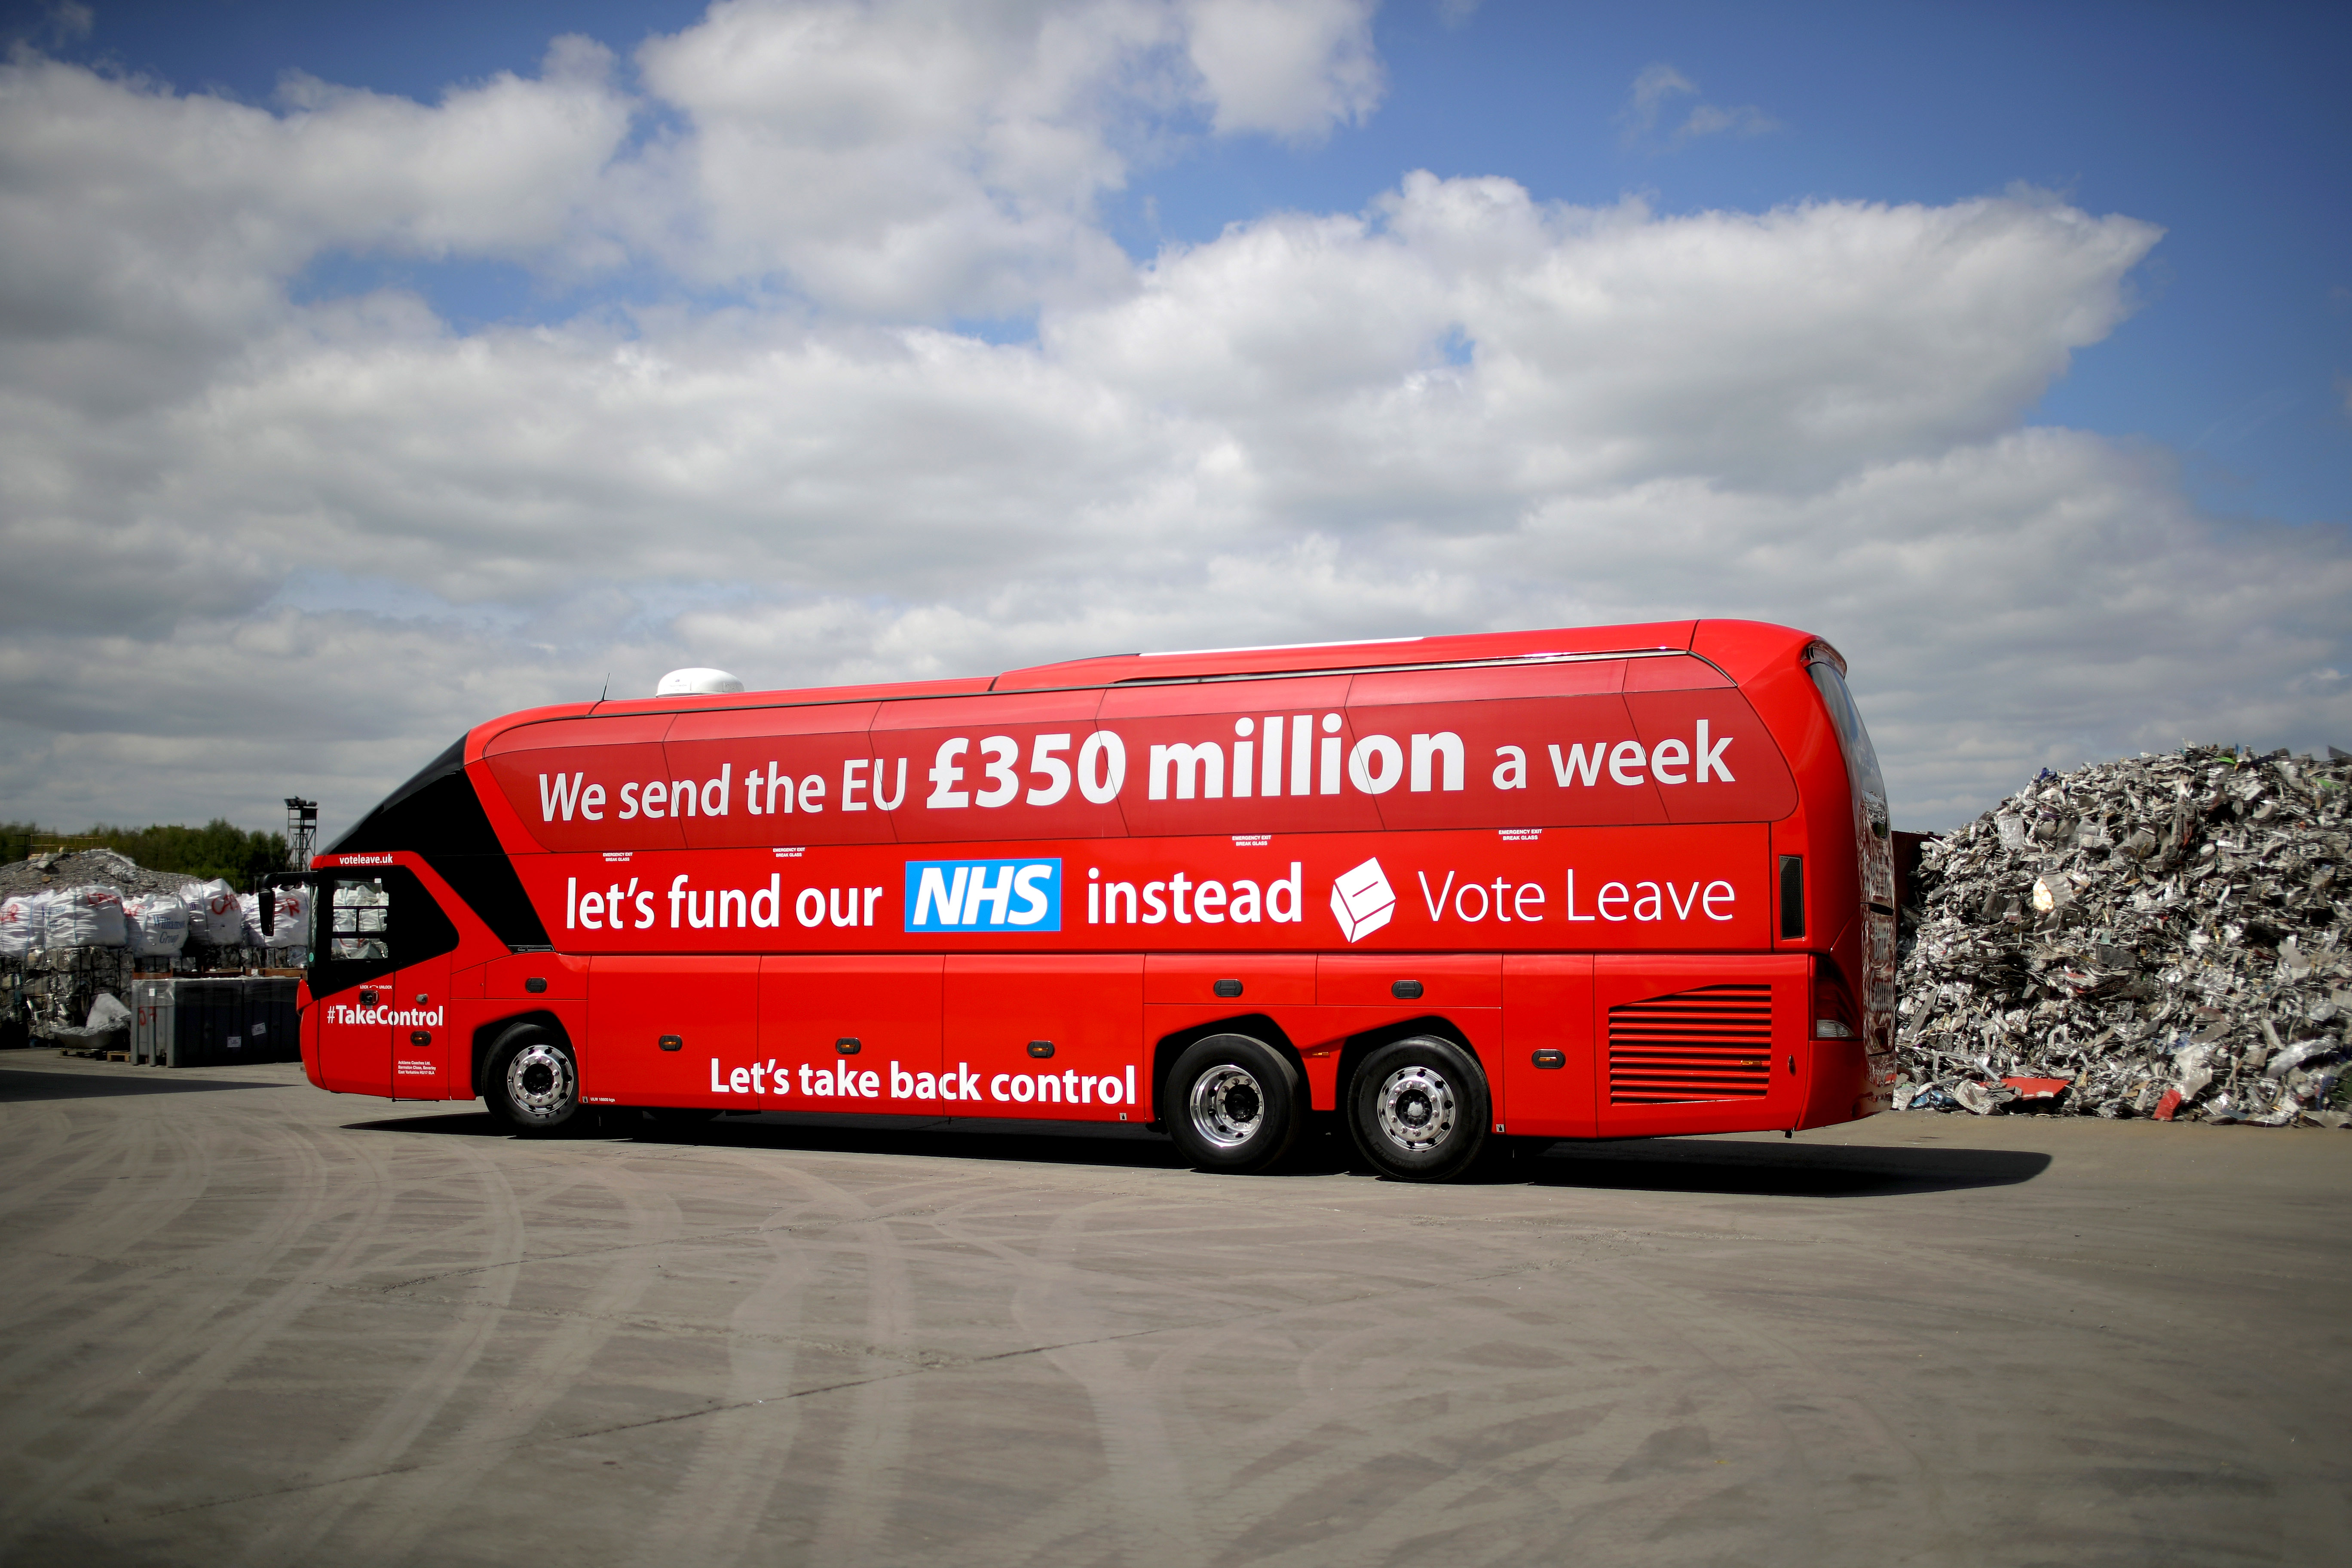 STAFFORD, ENGLAND - MAY 17: The Vote Leave campaign bus arrives at JBMI Group, Kingsilver Refinery in Hixon, Staffordshire during the Vote Leave, Brexit Battle Bus tour on May 17, 20016 in Stafford, England. Boris Johnson and the Vote Leave campaign are touring the UK in their Brexit Battle Bus. The campaign is hoping to persuade voters to back leaving the European Union in the Referendum on the 23rd June 2016. (Photo by Christopher Furlong/Getty Images)